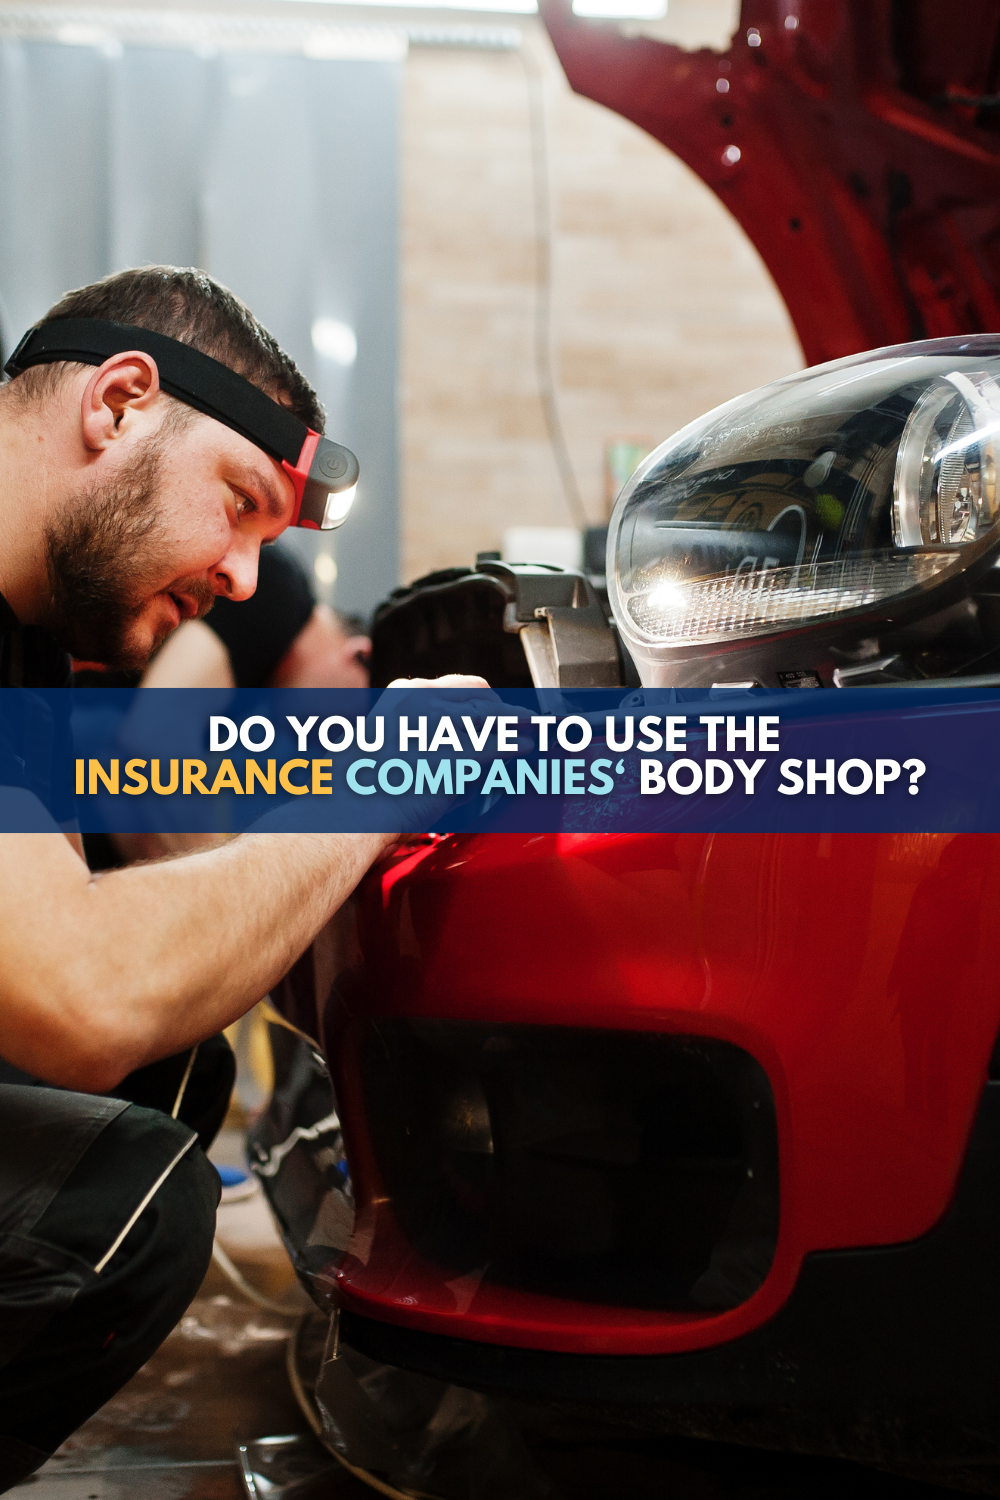 Do You Have To Use The Body Shop The Insurance Company Recommends?